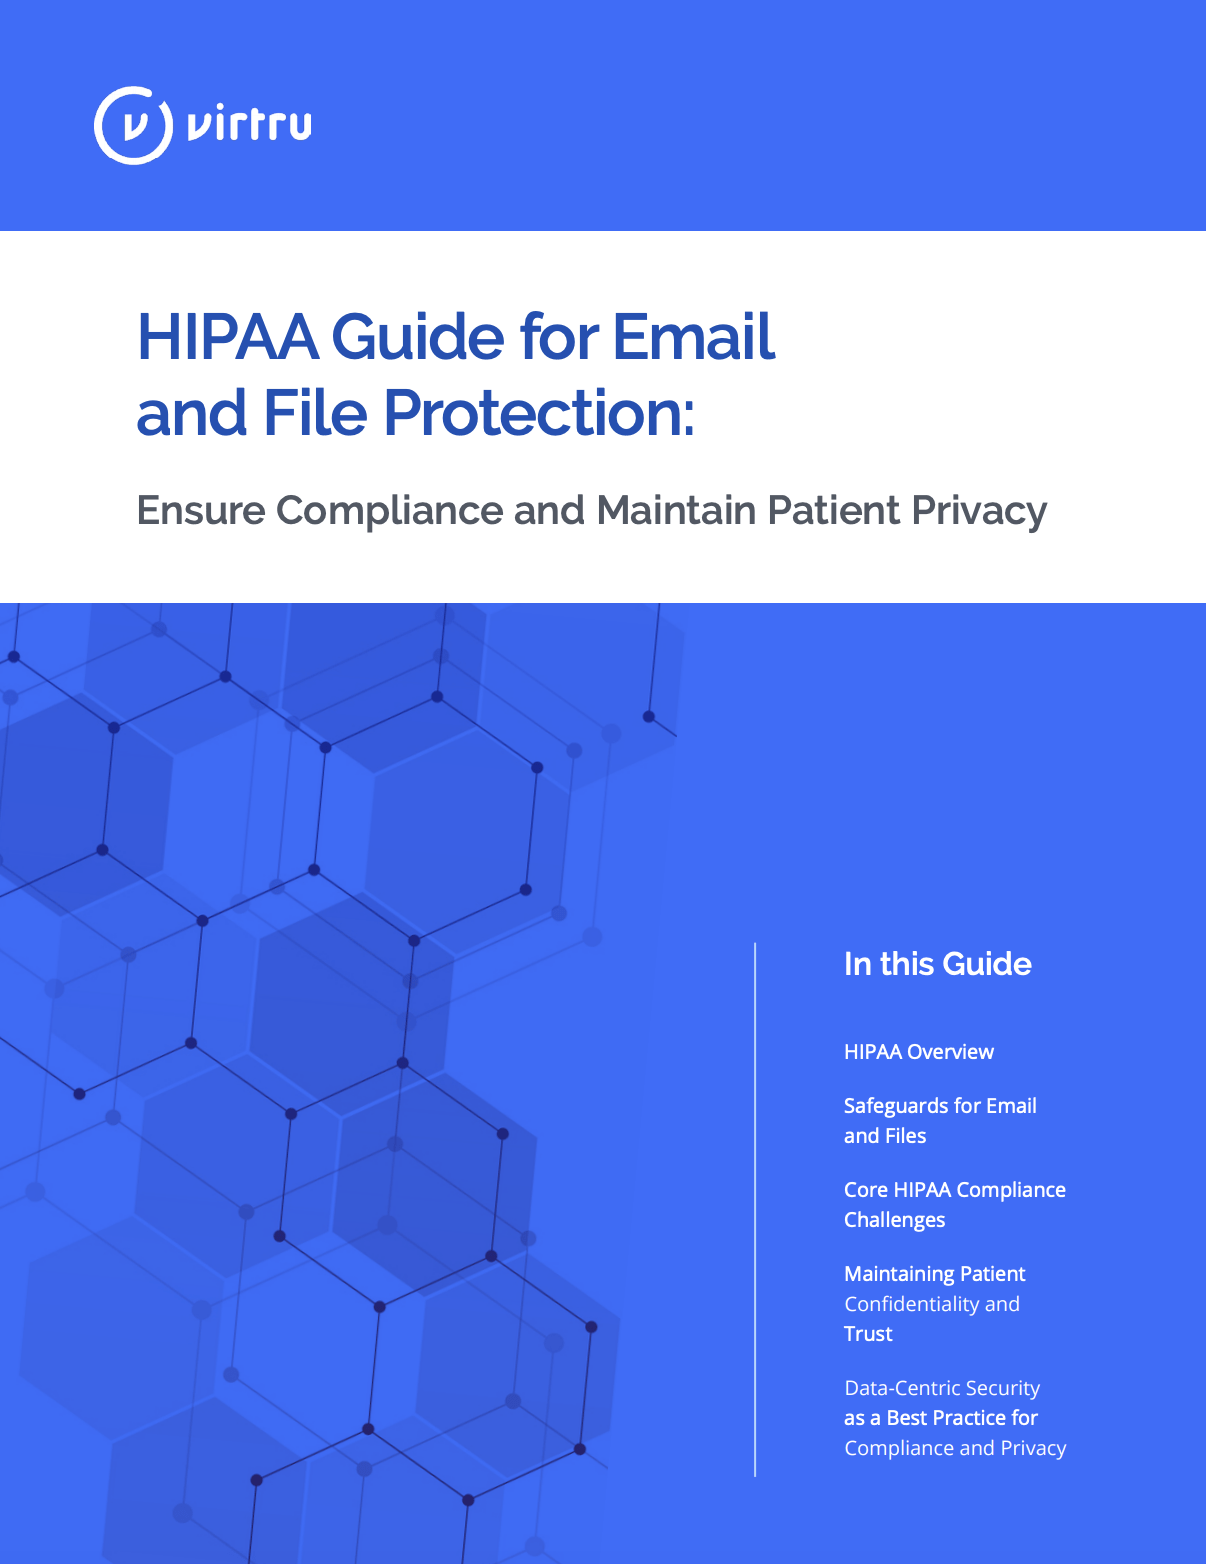 HIPAA Guide for Email and File Protection Coverhipaa-coverhipaa-cover